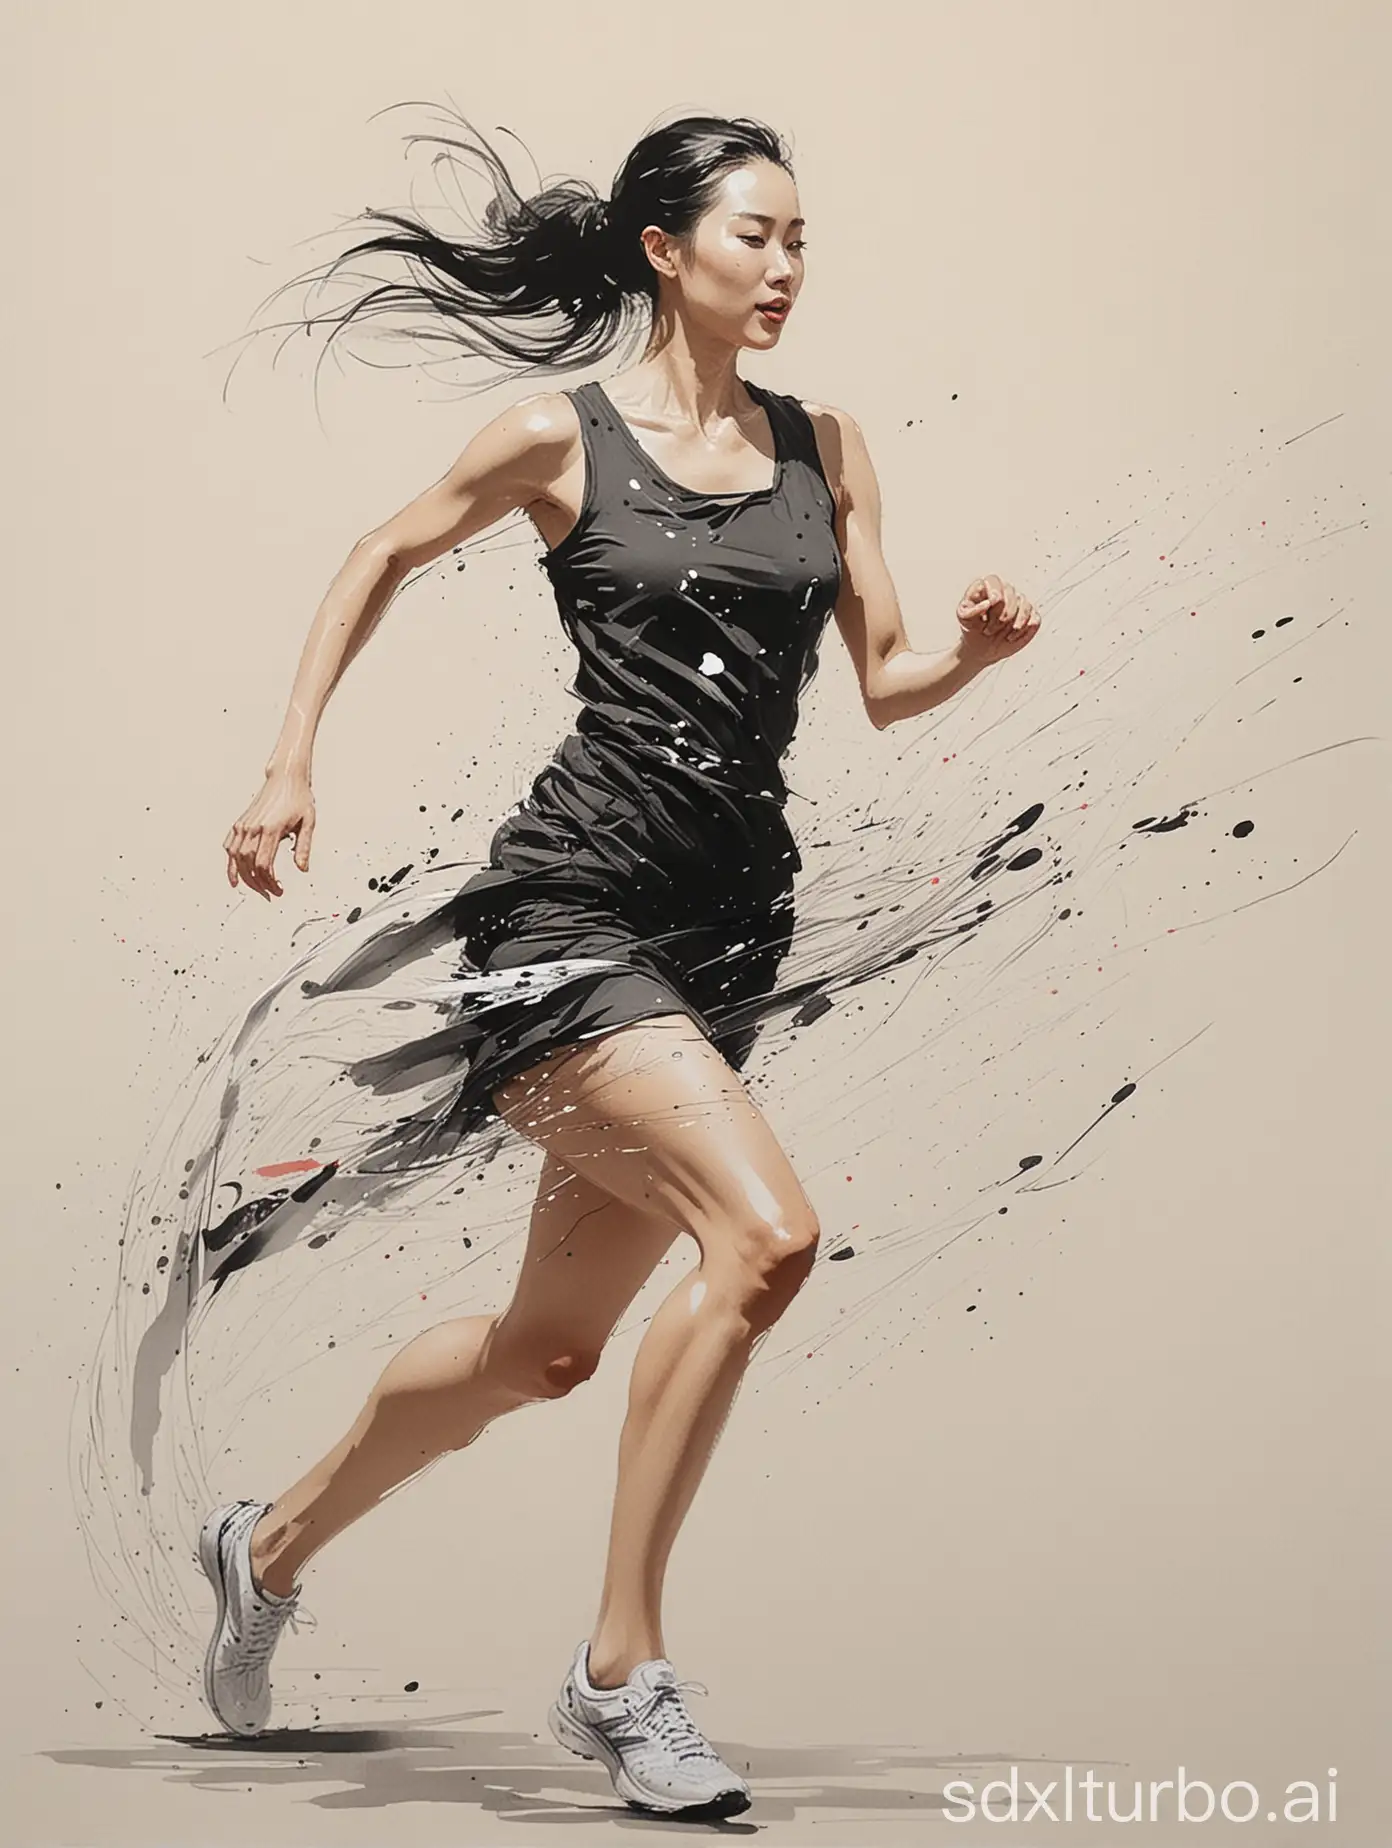 a painting of a simply running woman, high speed, solo, in the style of wu guanzhong, Chinese painting, abstract random ink strokes, abstract lines, energetic brush strokes